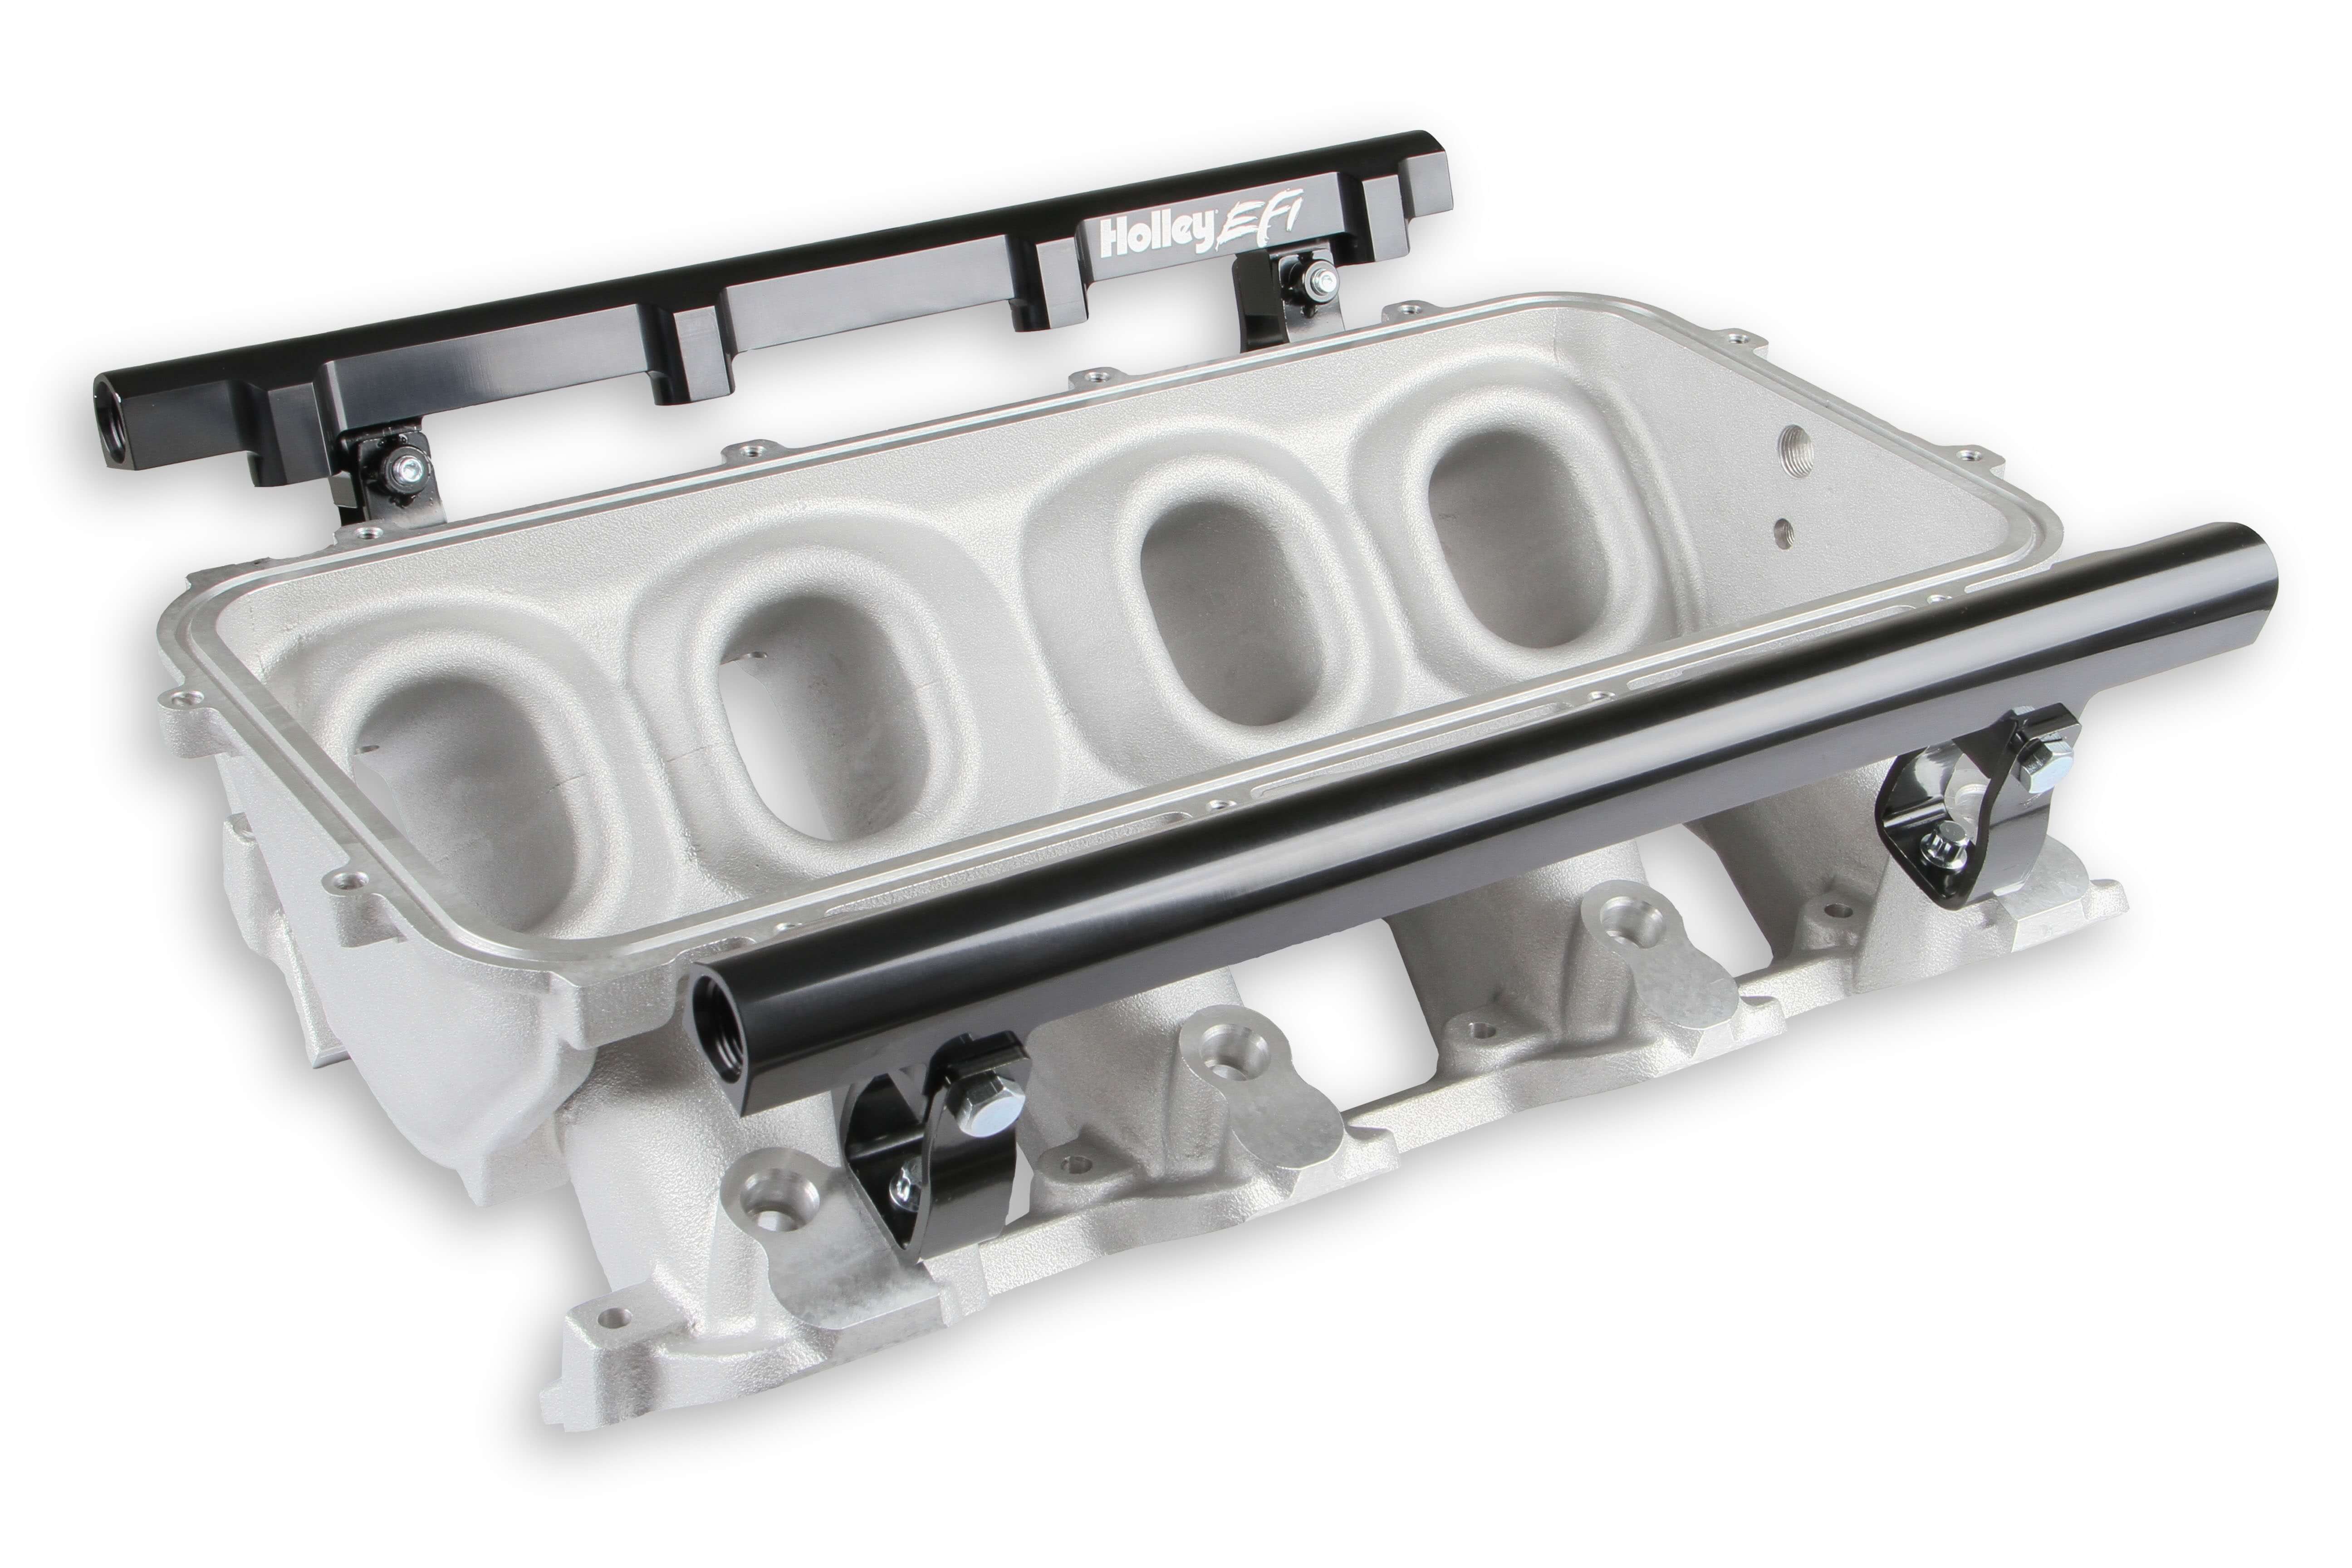 LS1/LS2/LS6 Holley Base Manifold and Rail Kit for Lo-Ram 300-620